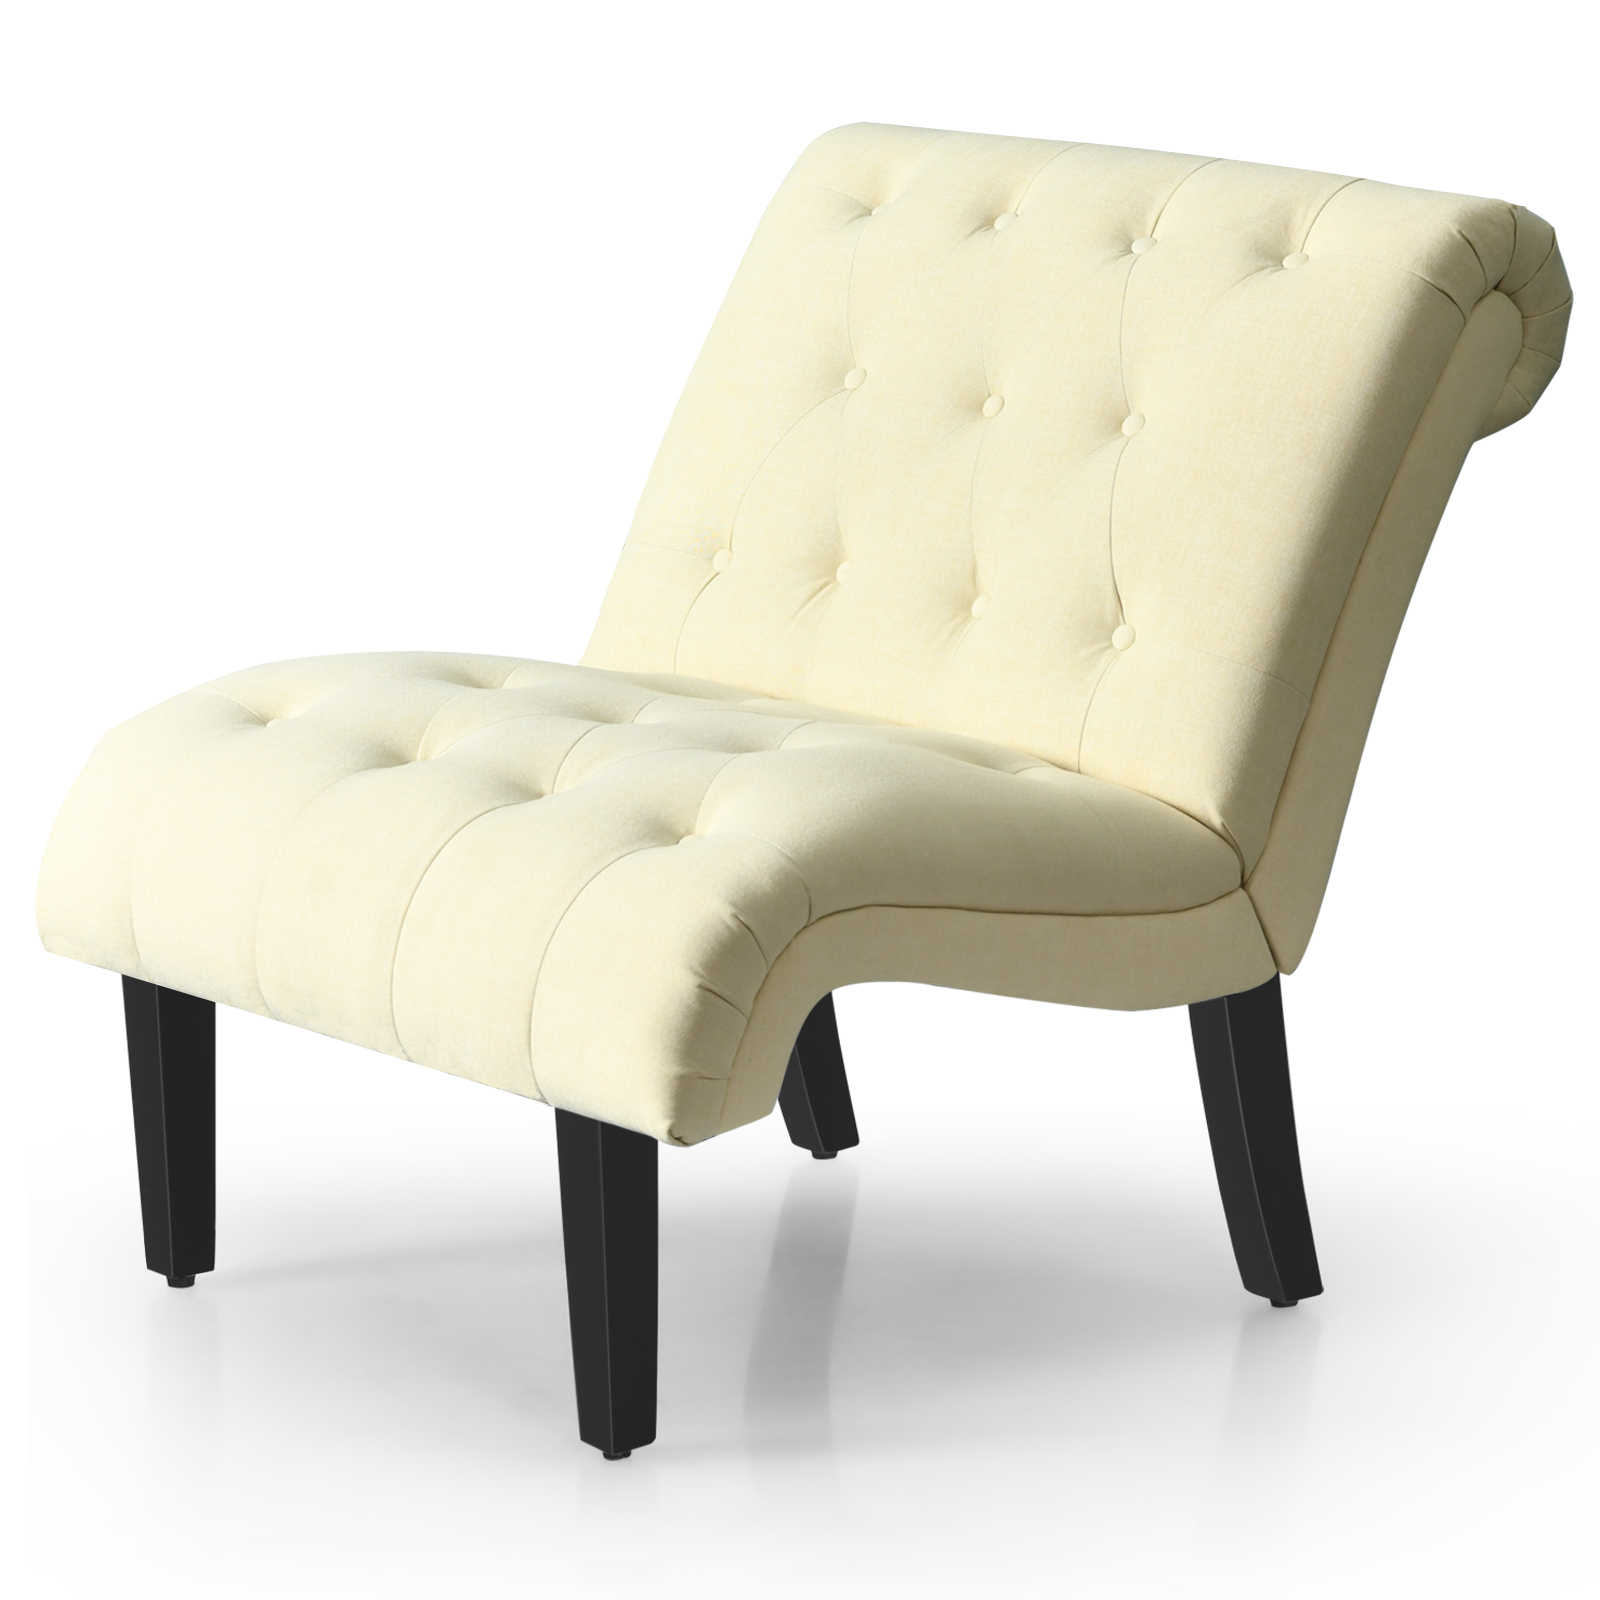 Modern_Upholstered_Accent_Chair_with_Button_Tufted_Linen_Fabric_Beige-8.jpg